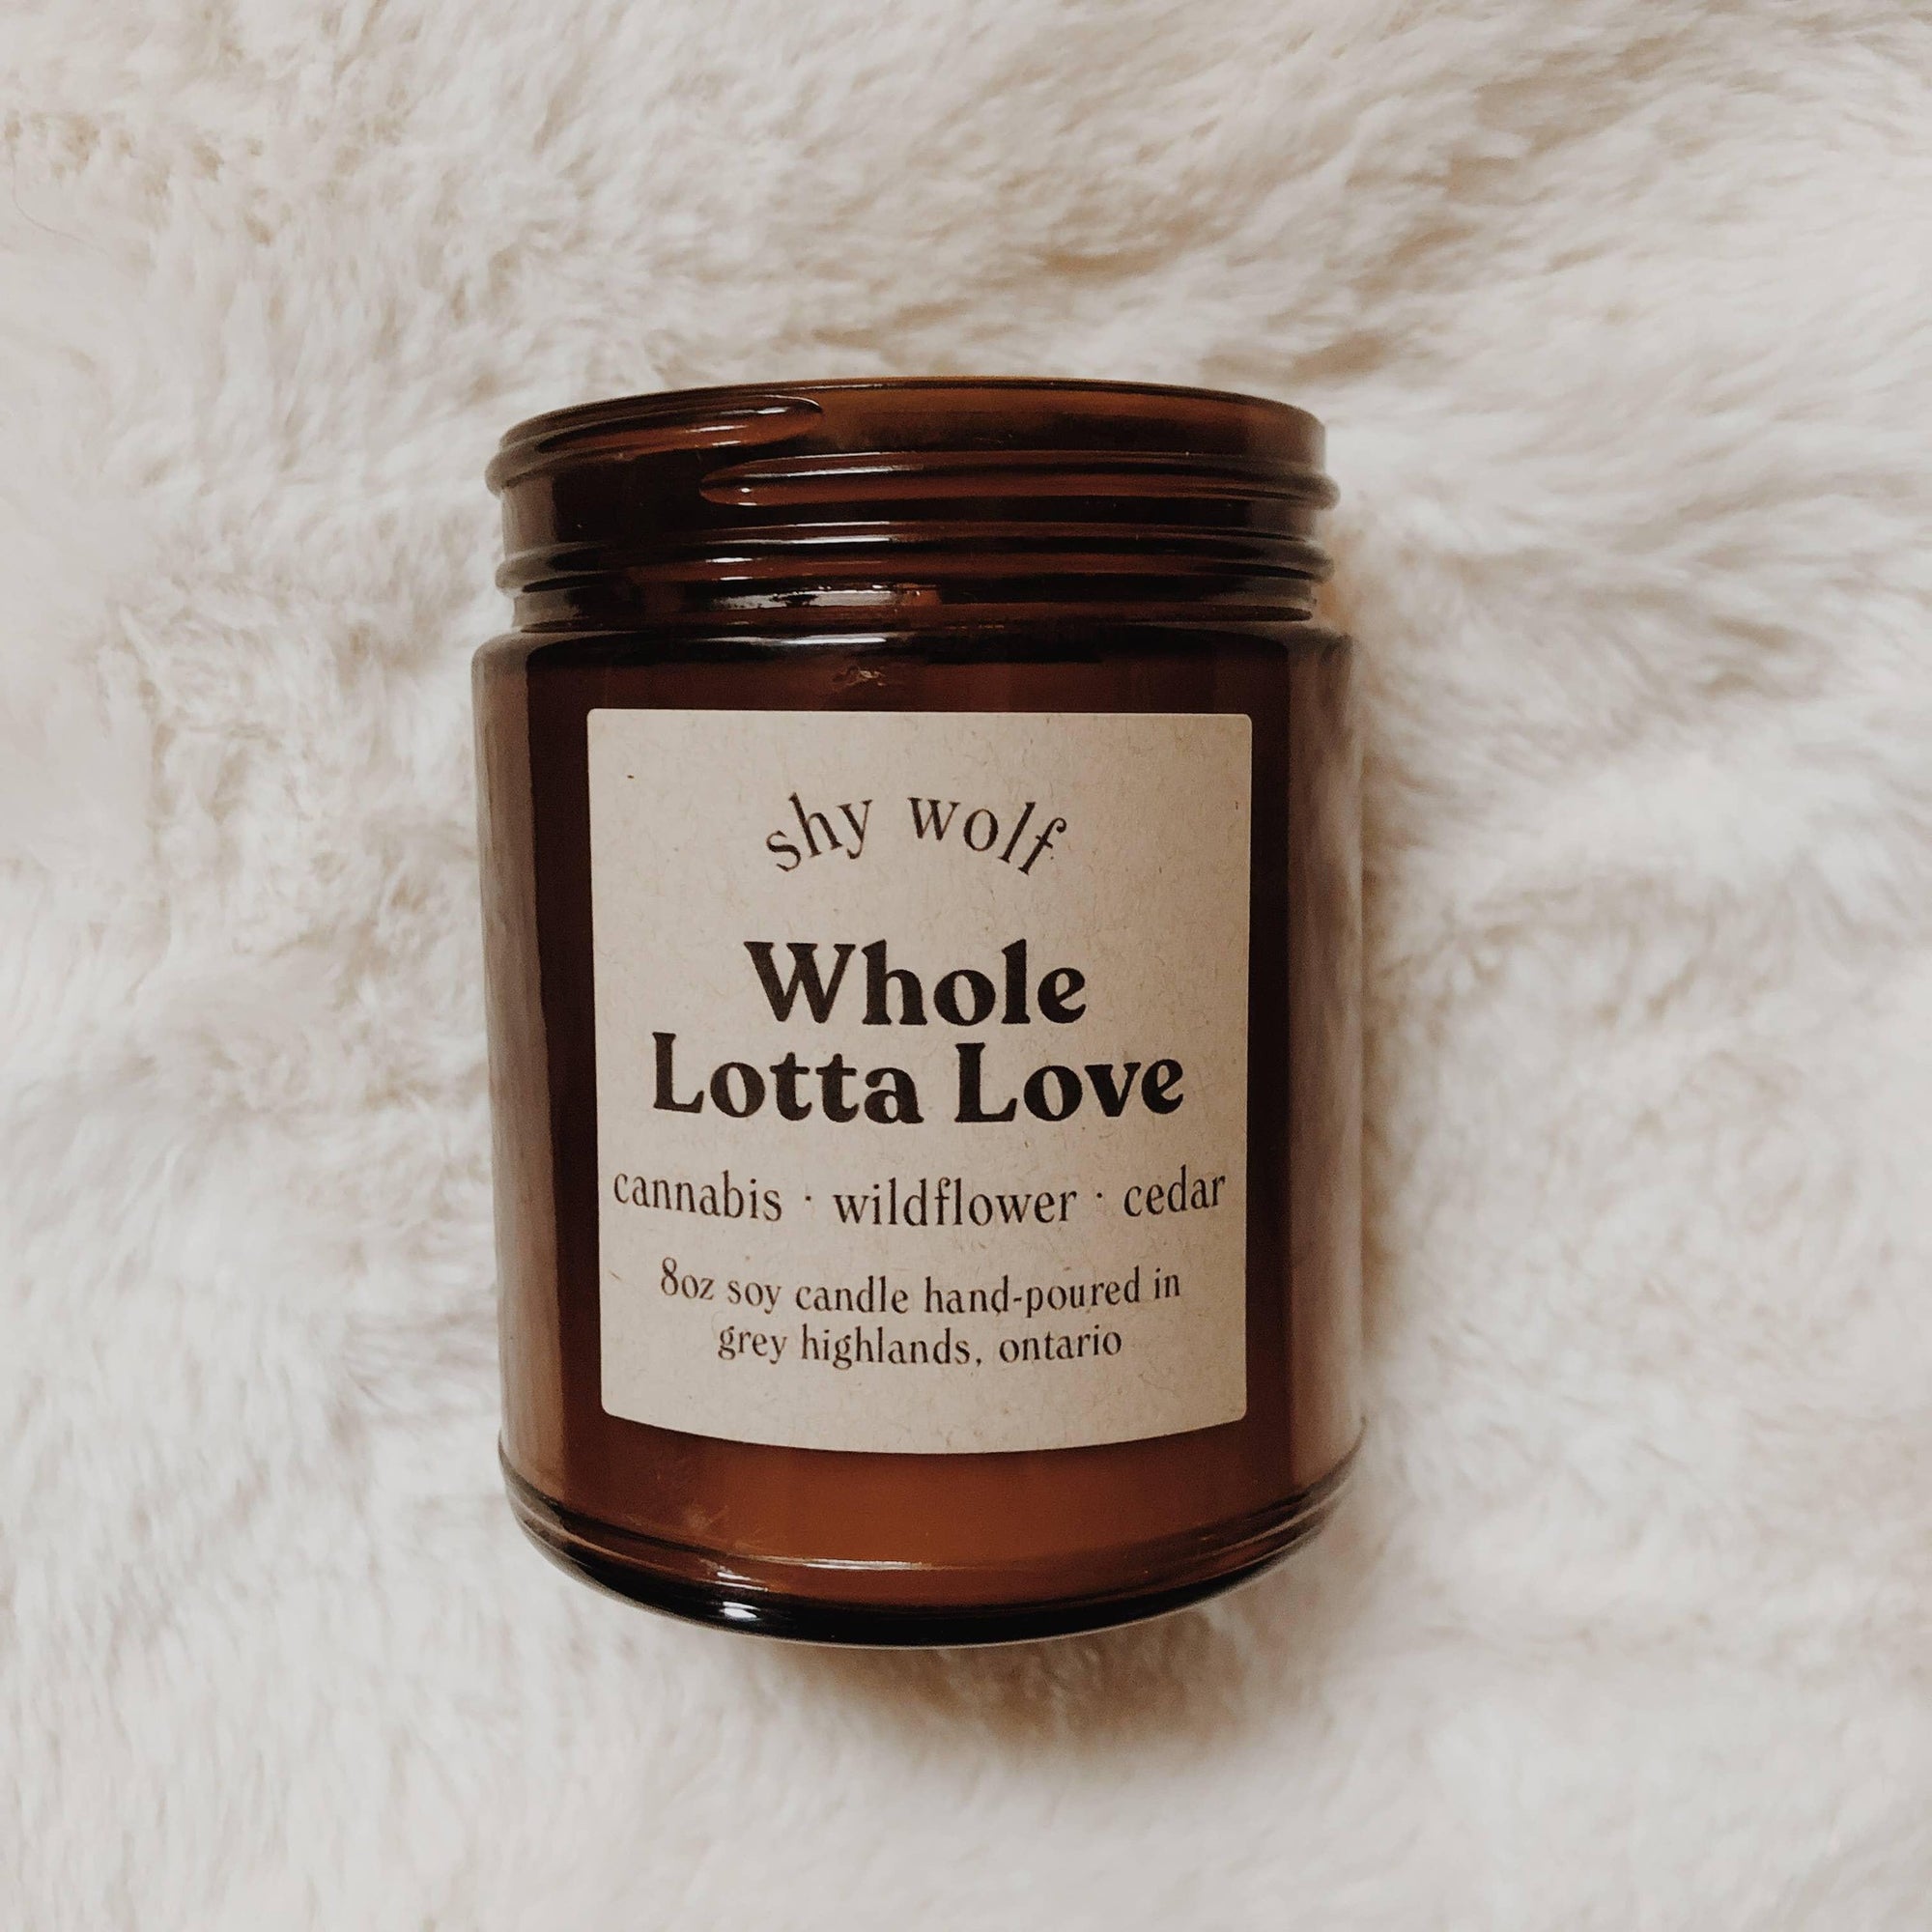 Shy Wolf Candles' Whole Lotta Love - Rock and Roll Candle.